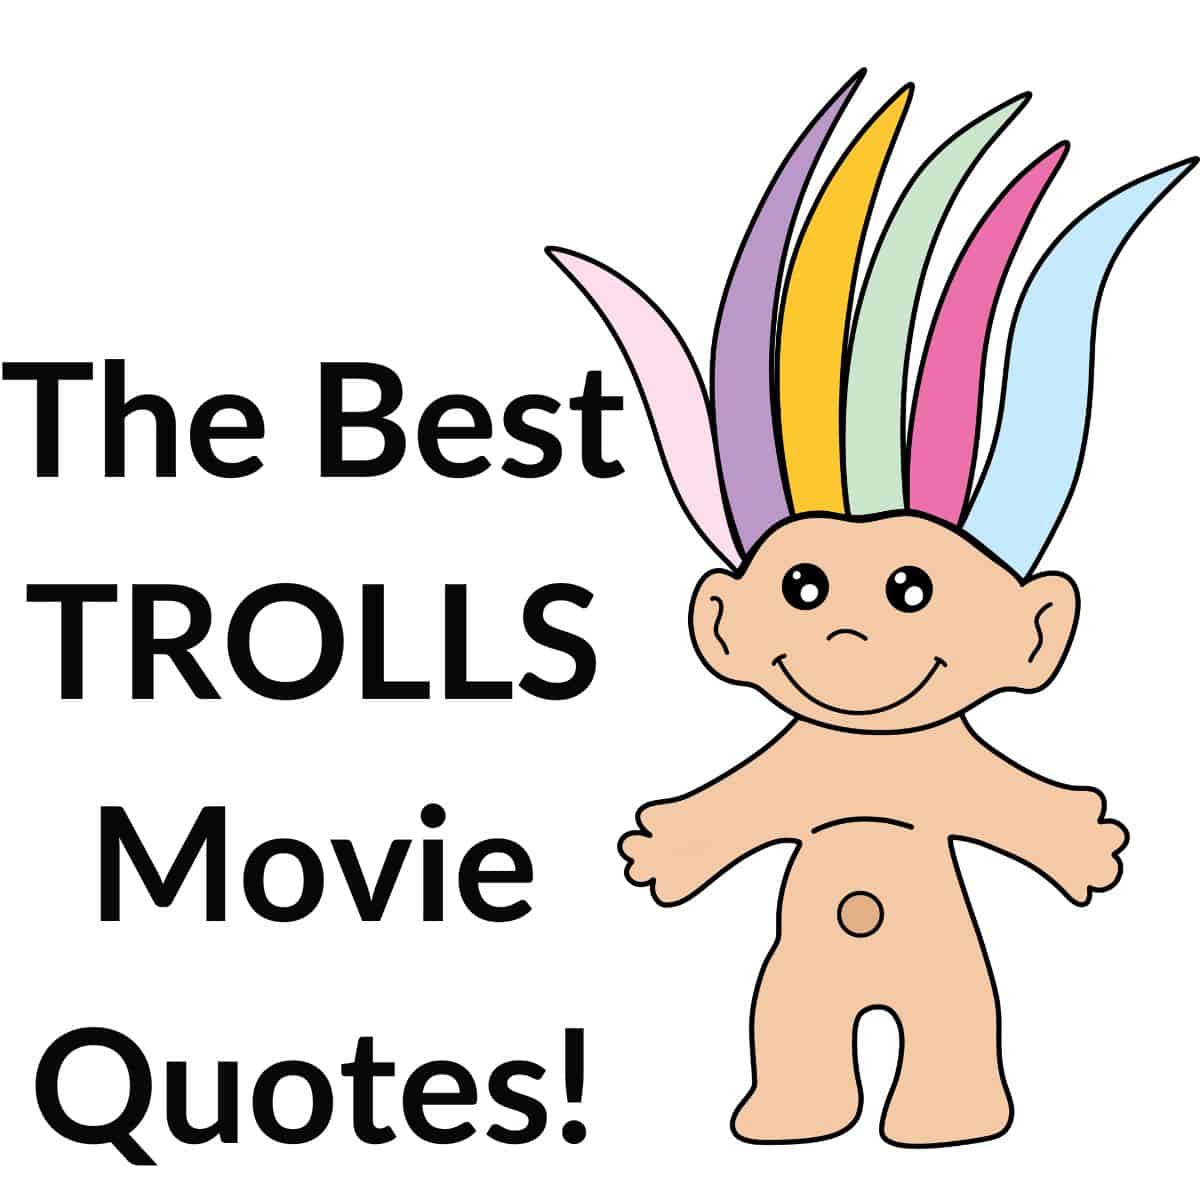 The Best Inspirational Trolls Movie Quotes About Happiness